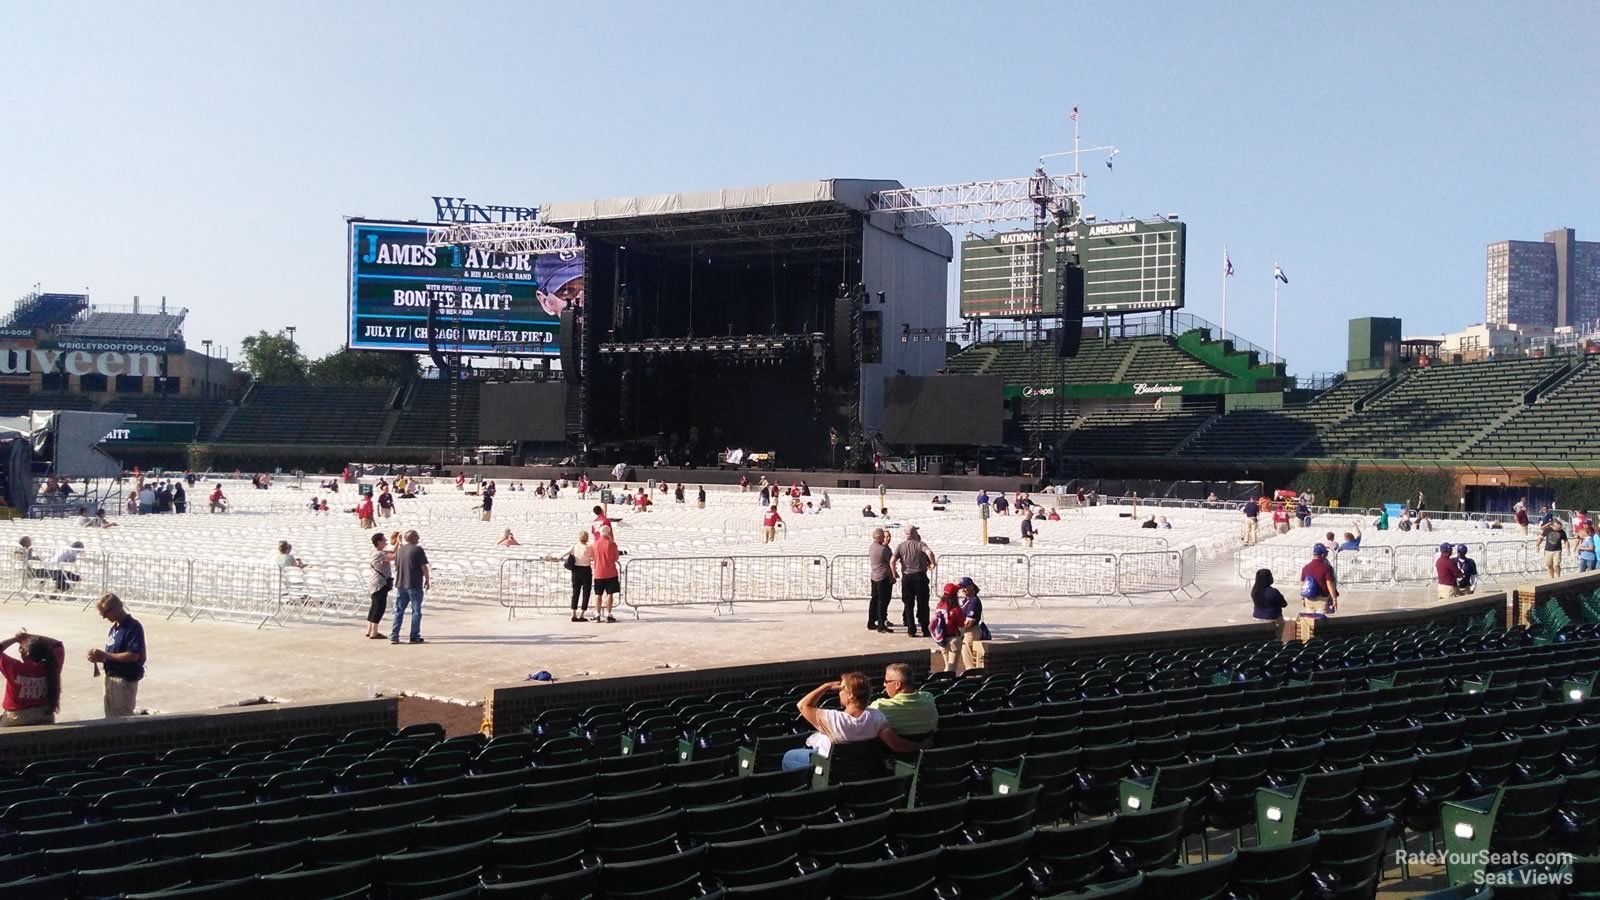 section 26, row 10 seat view  for concert - wrigley field